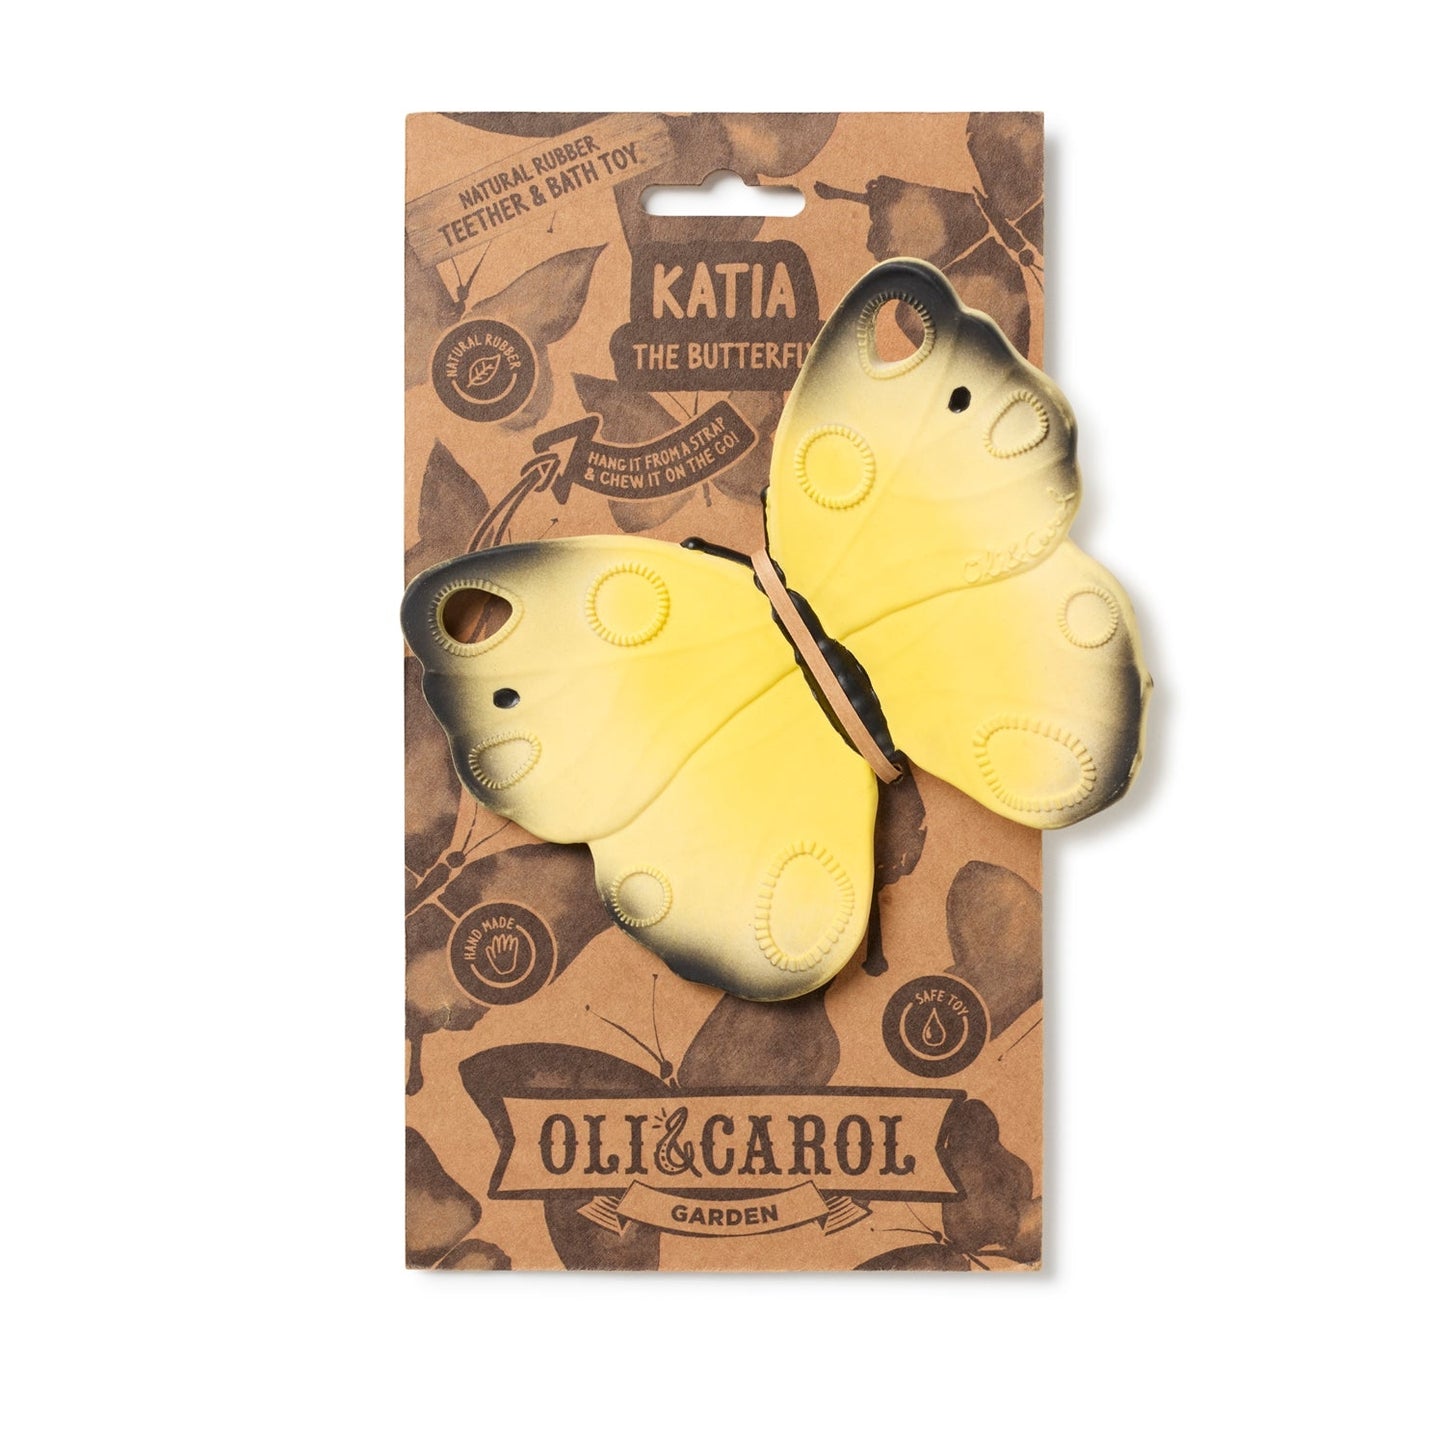 Katia the butterfly is a natural rubber teether, bath, & sensory play toy! A wide variety of textures around its wings help stimulate the senses and soothe teething gums. Oli & Carol products are made following an artisanal and sustainable process with 100% natural rubber from hevea trees